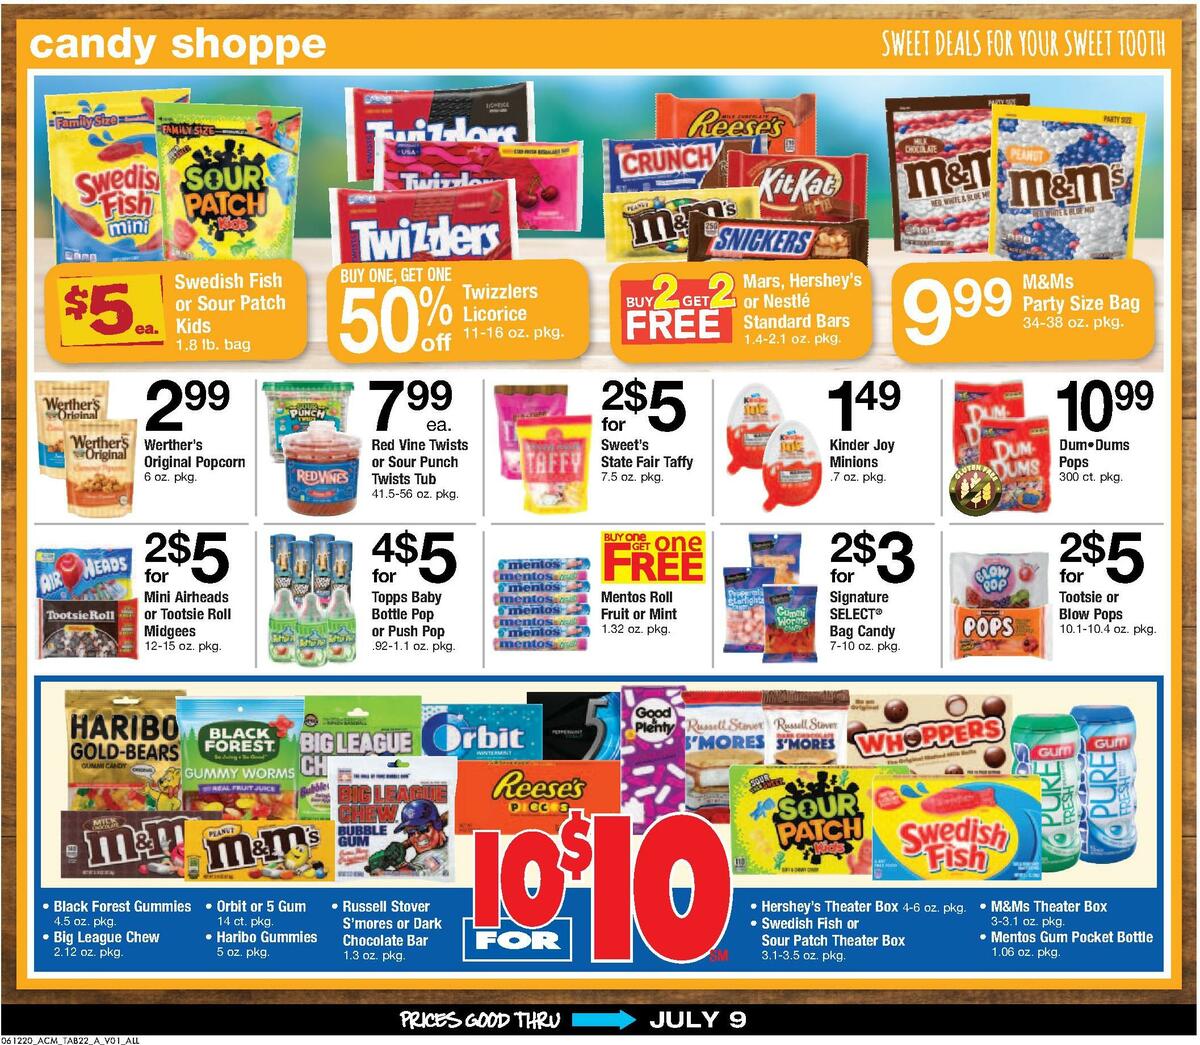 ACME Markets Big Book Weekly Ad from June 12